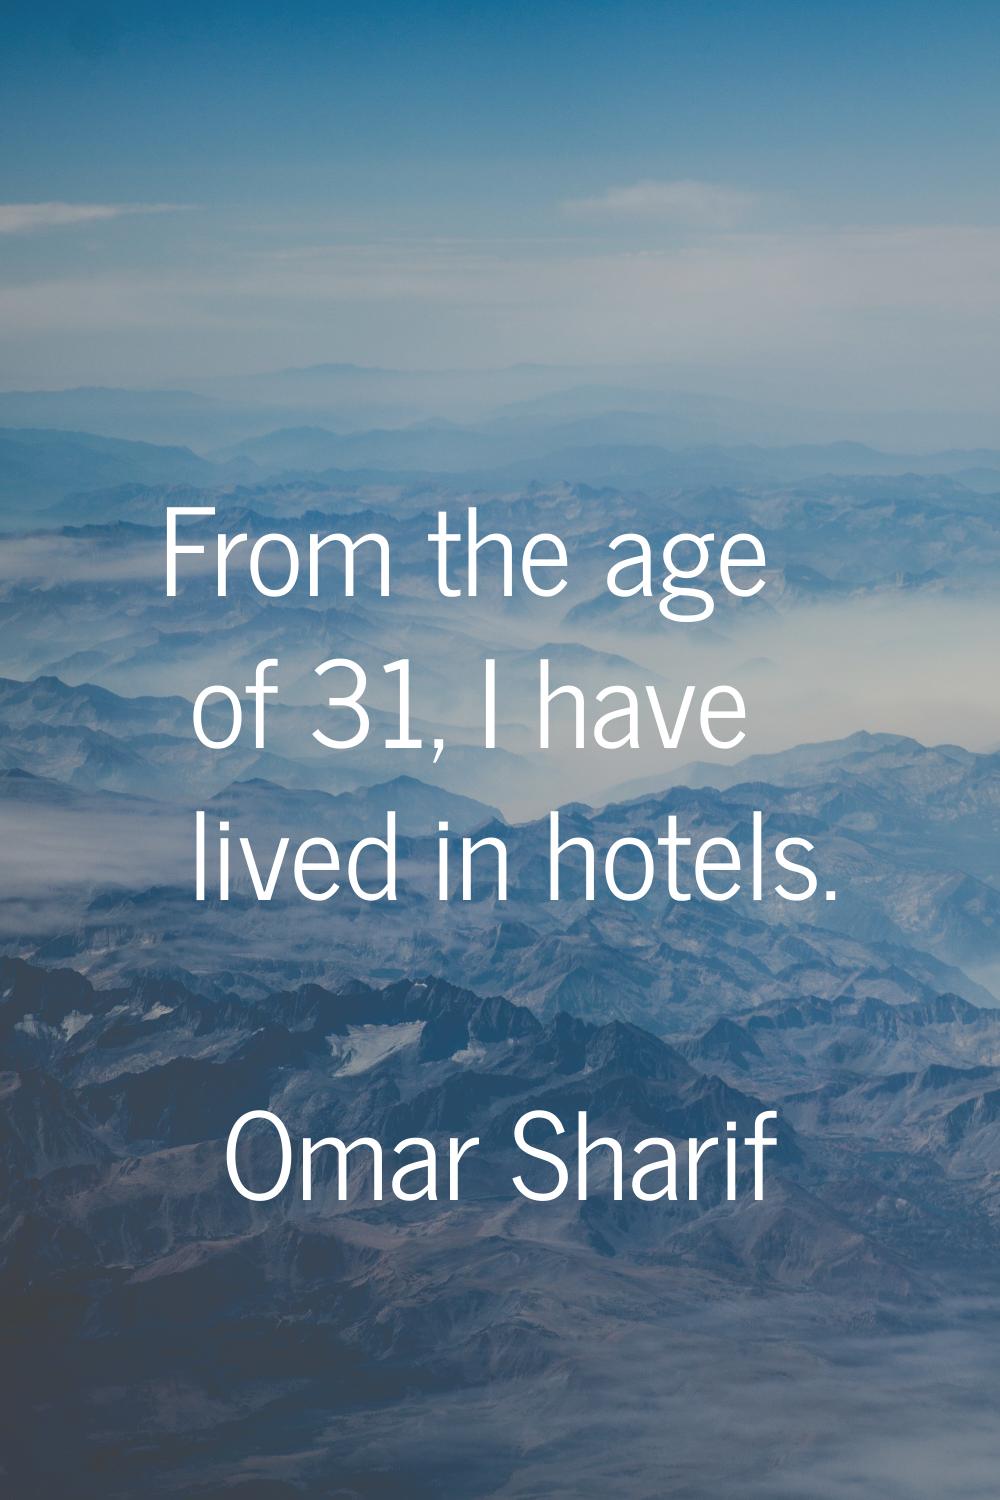 From the age of 31, I have lived in hotels.